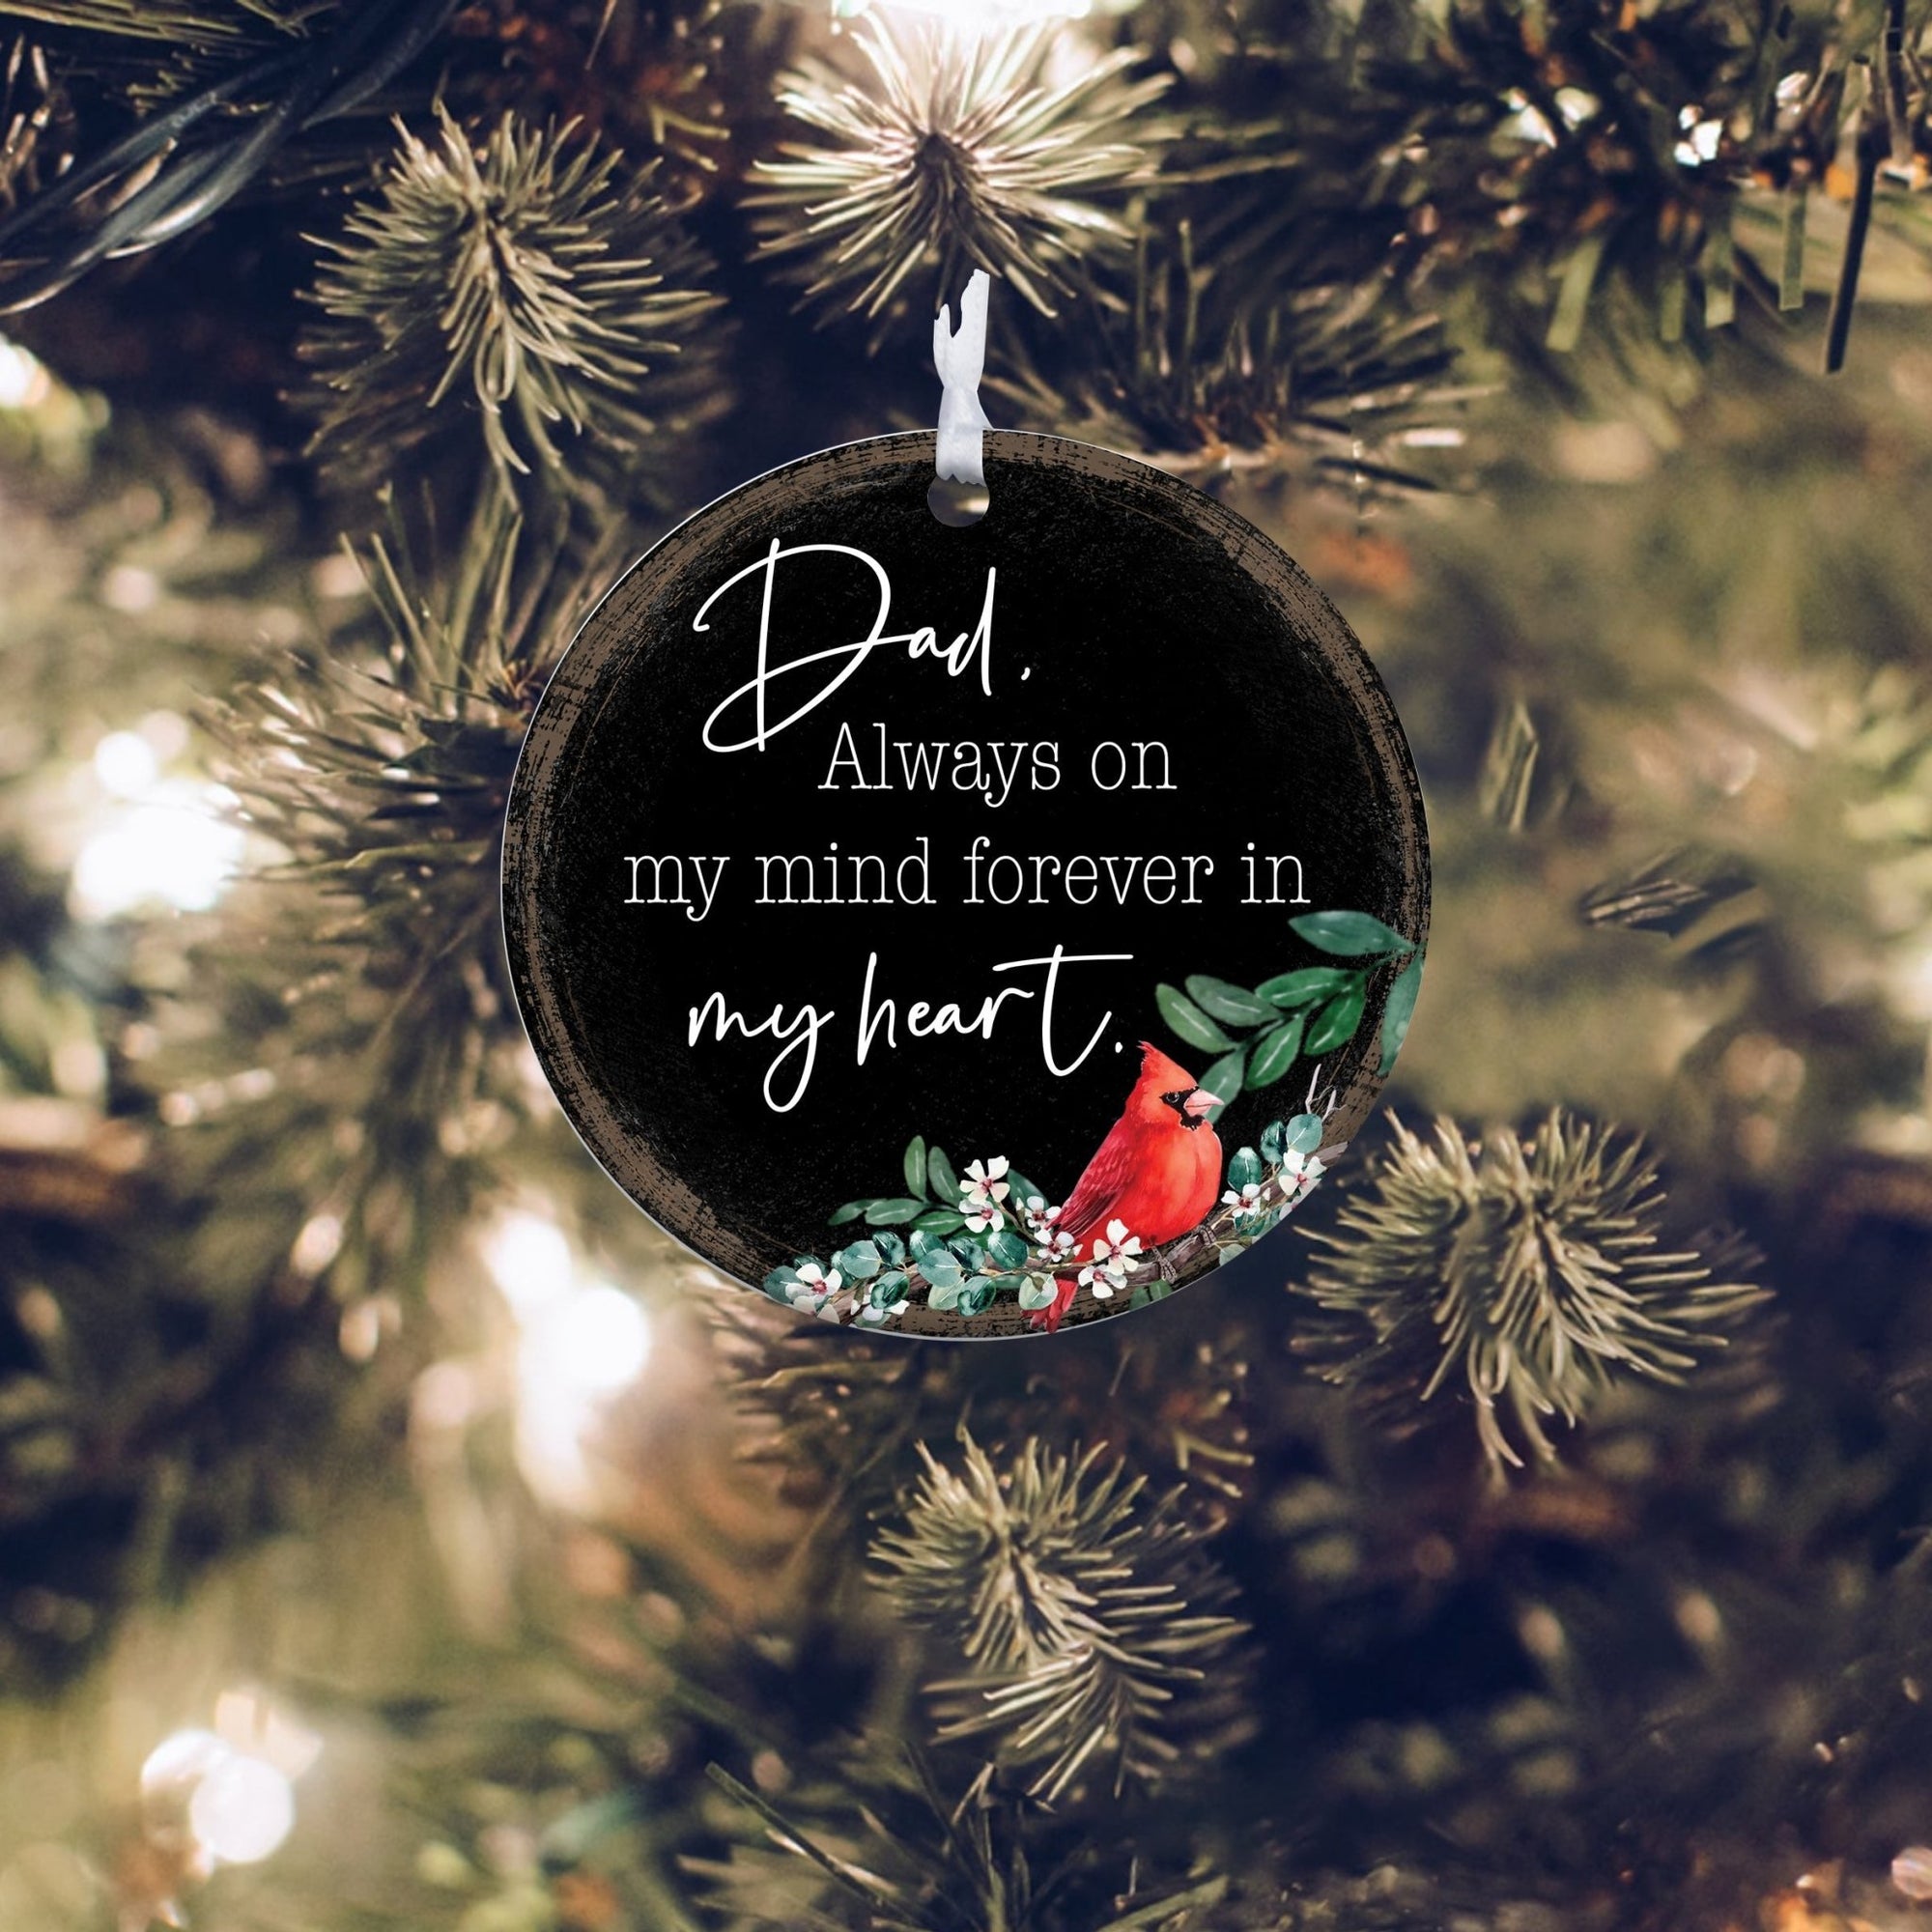 Bereavement ornaments to honor and remember those we've lost during the holiday season.